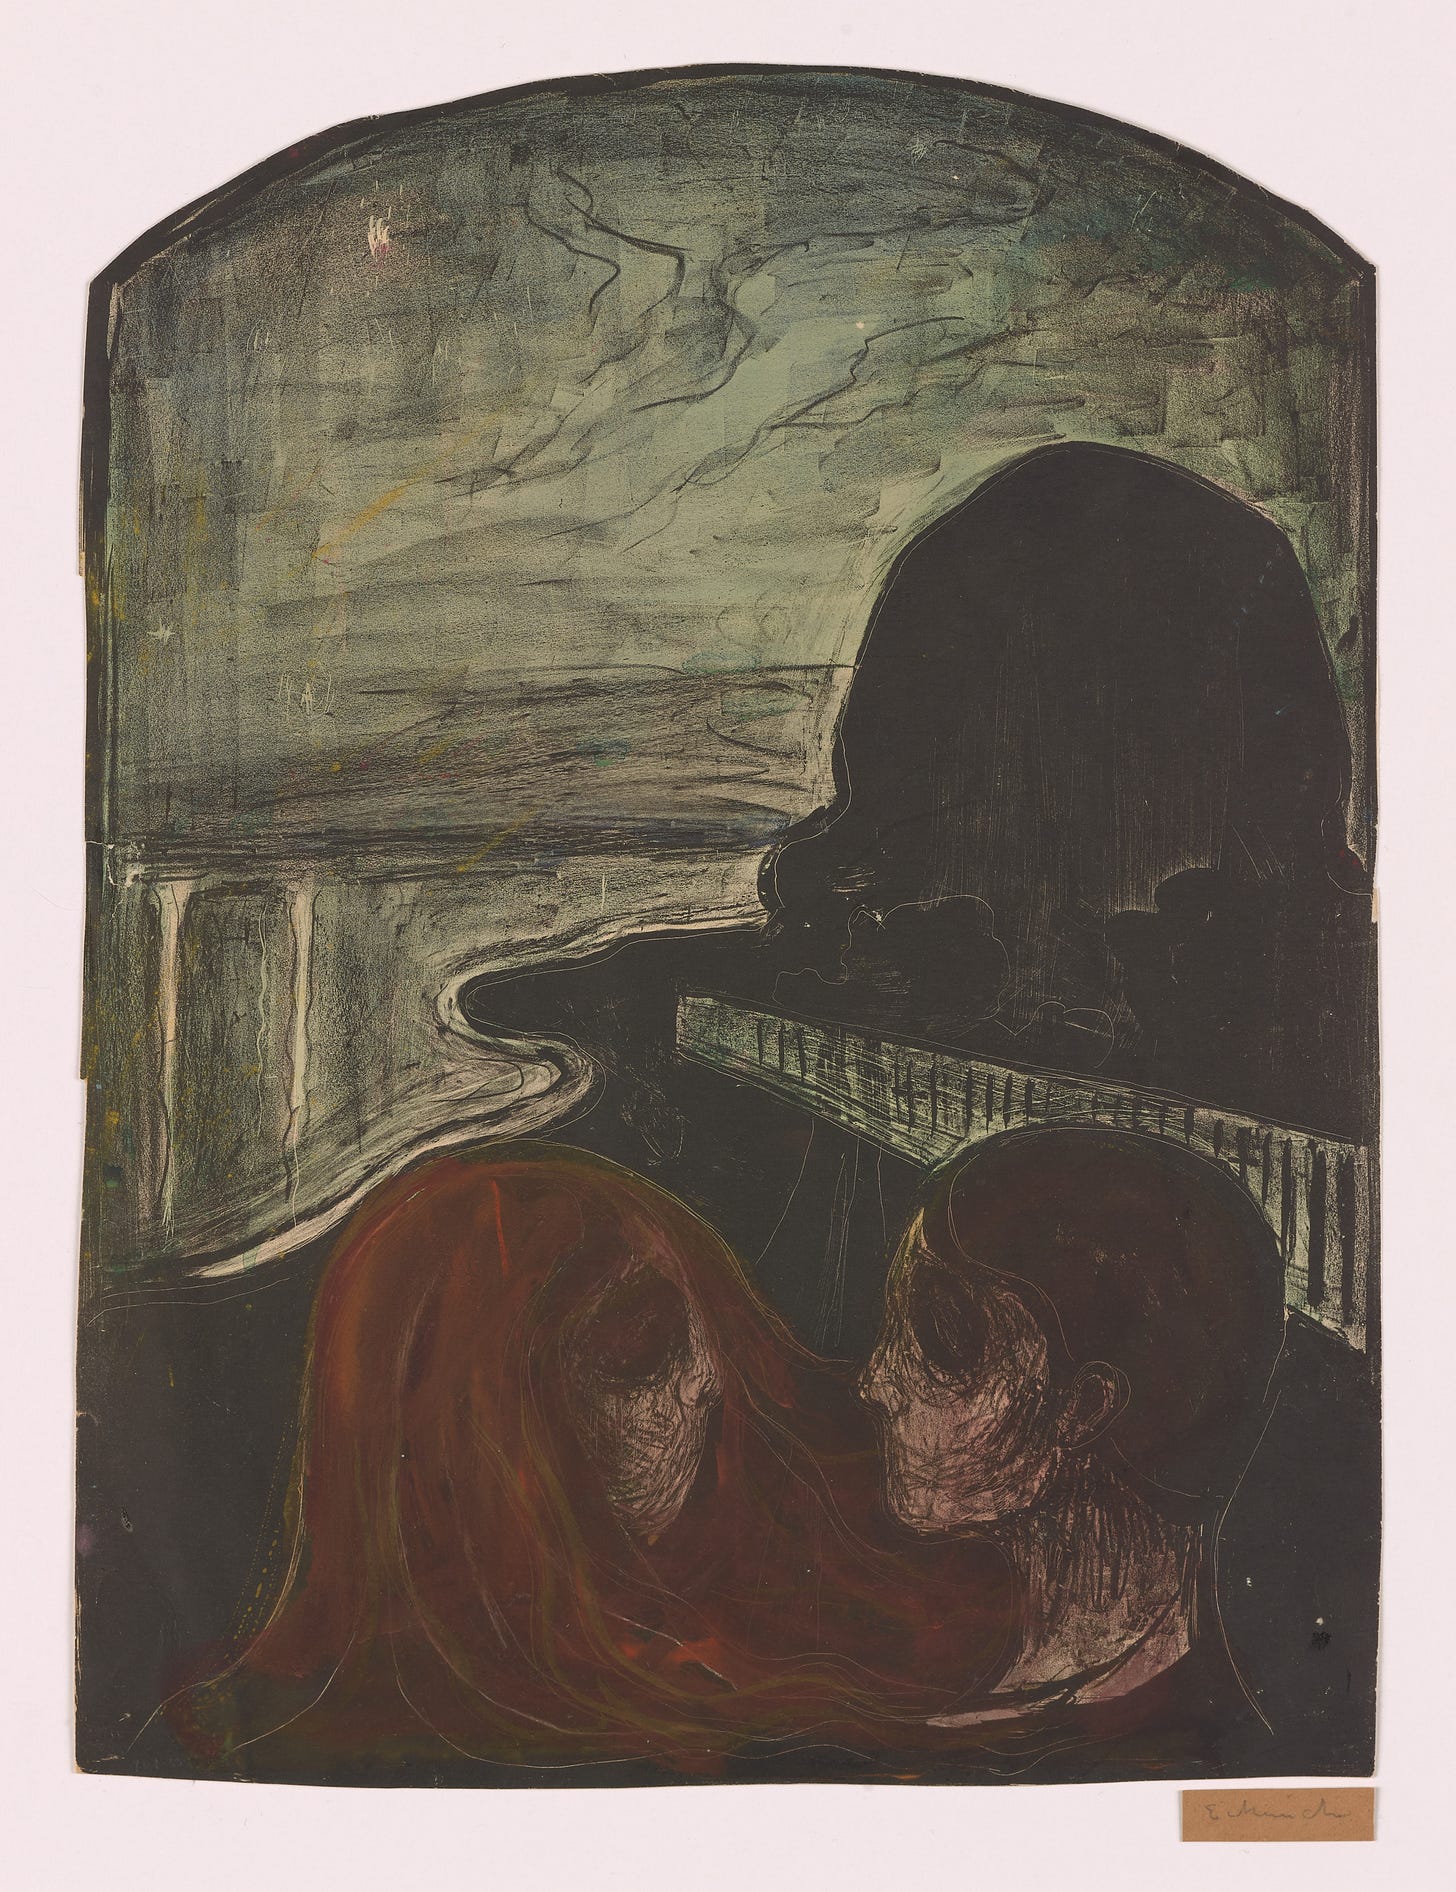 A darkly-coloured print of two figures, a woman with red hair and dark orb-like eyes, turned towards a man with short dark hair and dark-orb eyes. Up ahead of them is a long winding dark path surrounded by a grey shiny substance that looks like the sea. And in the distance, a large, dark, foreboding looking mountain looms.